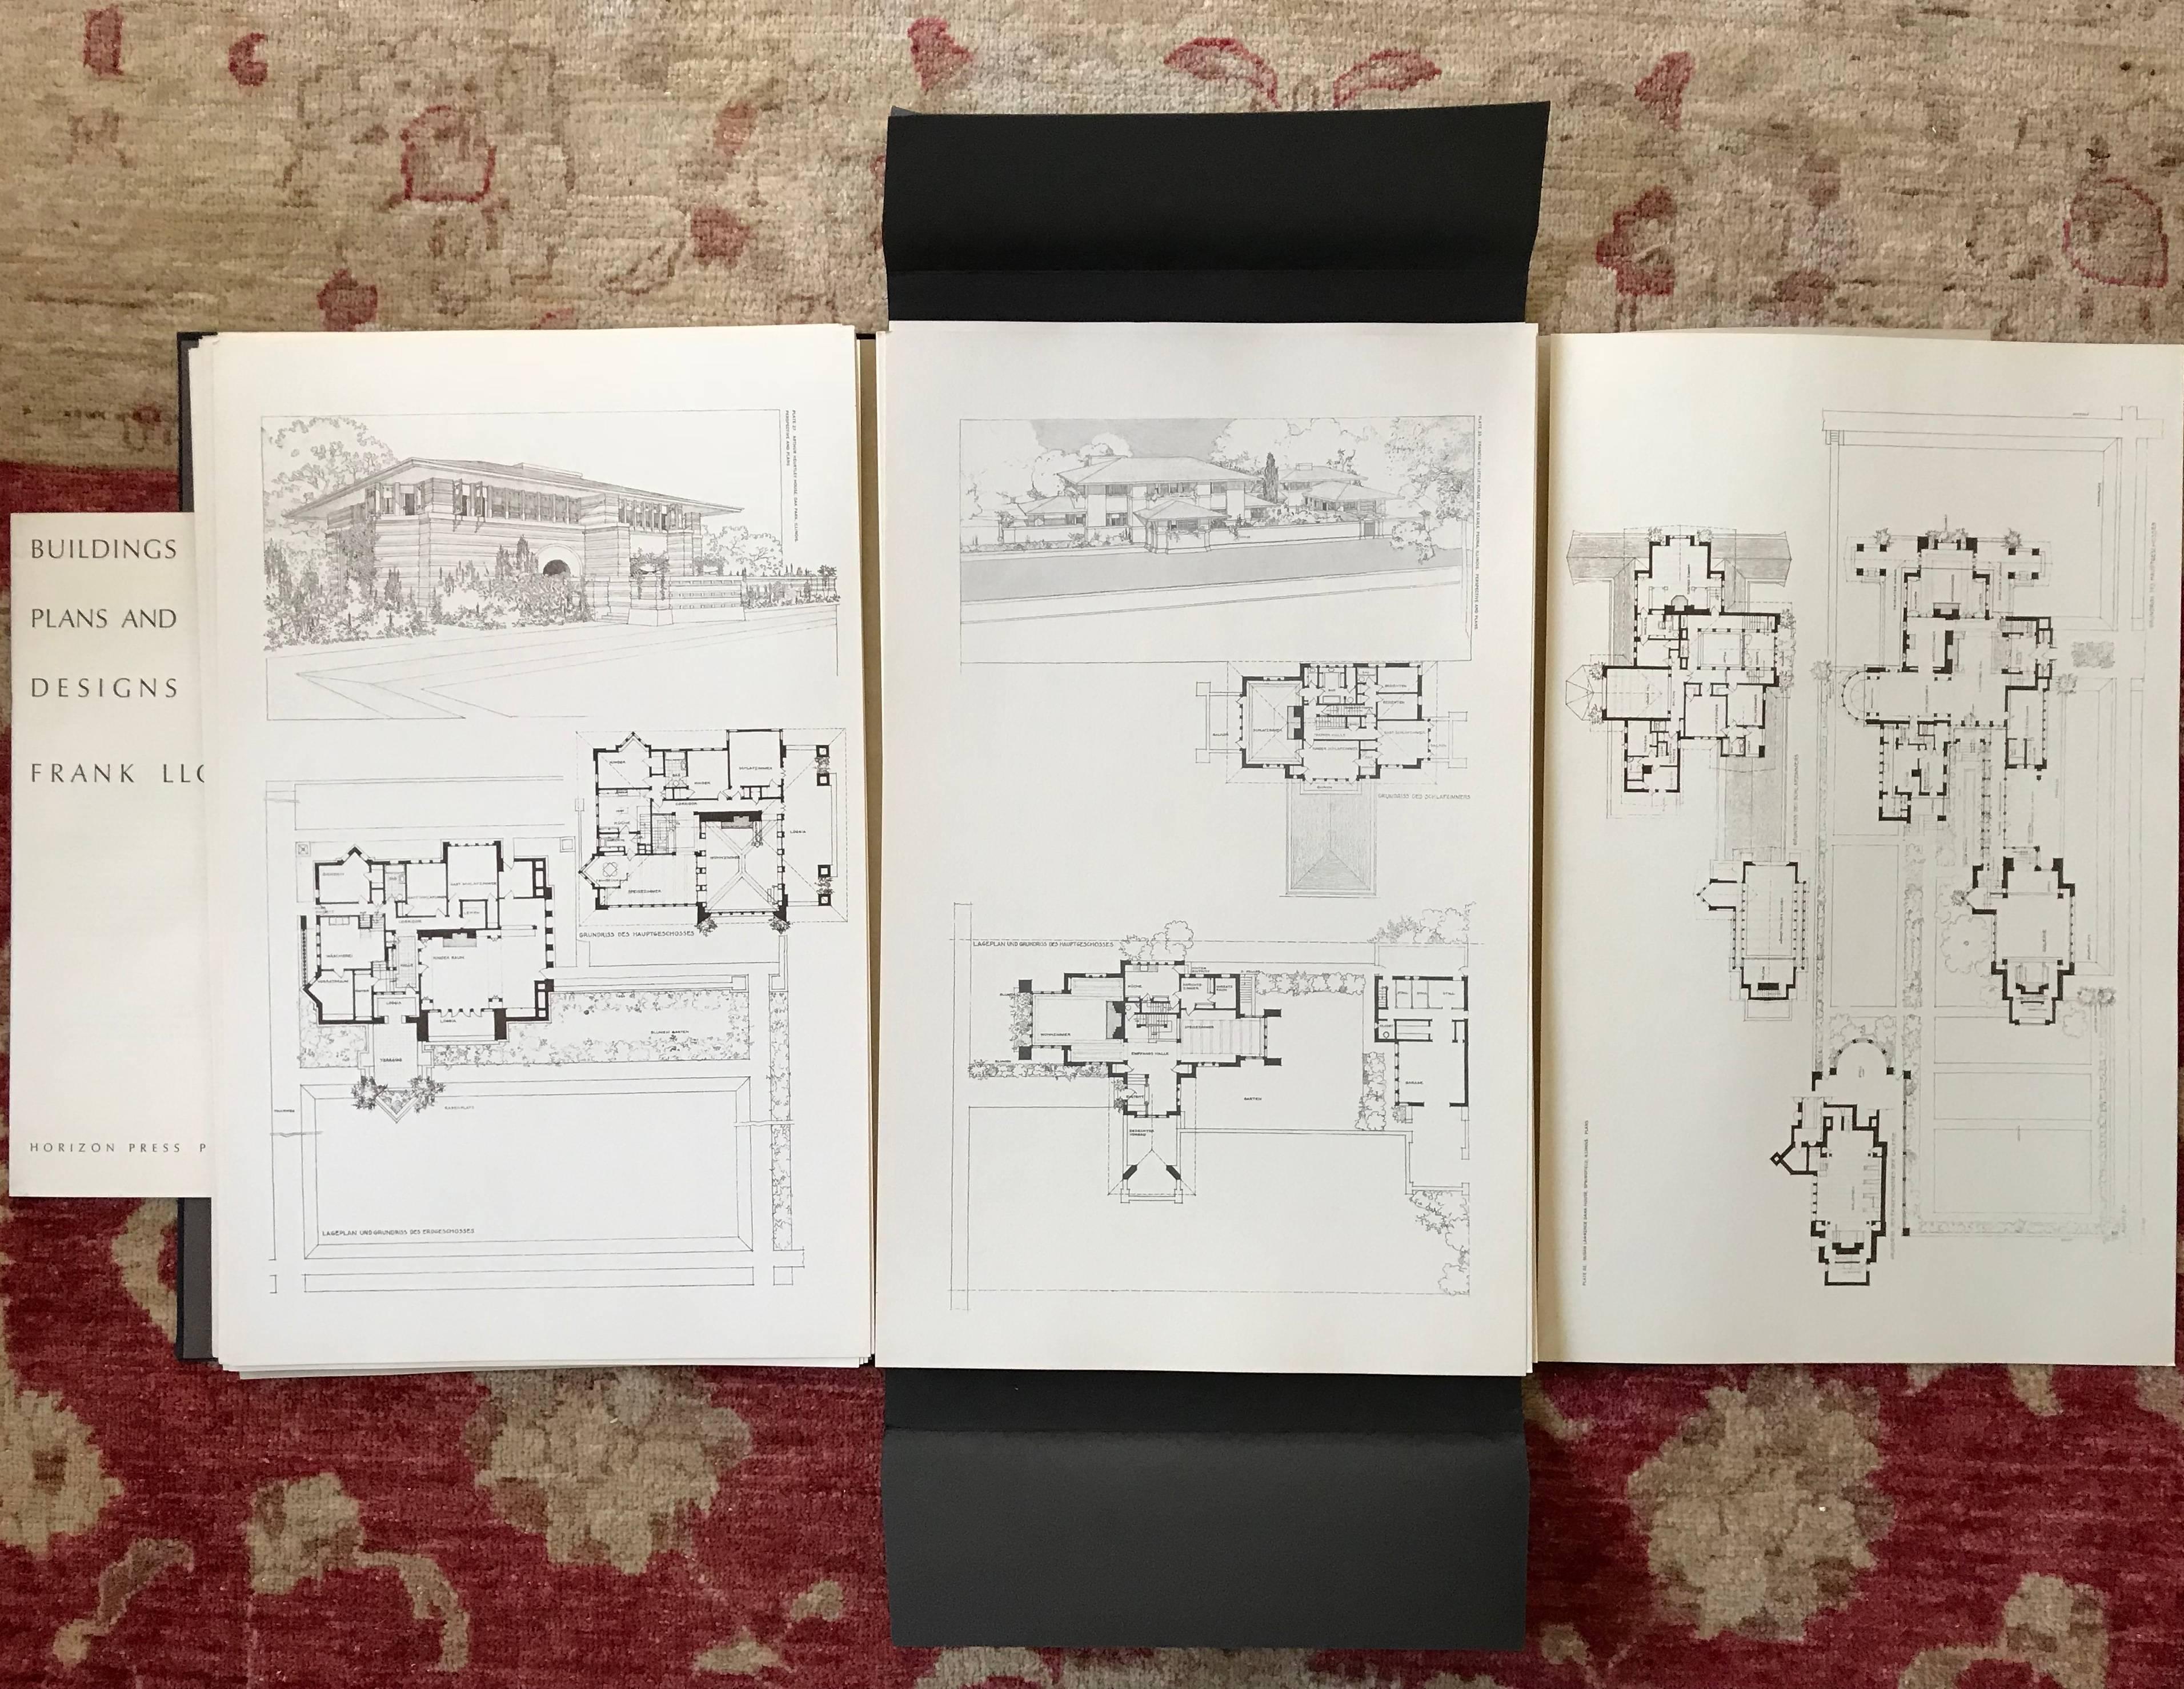 American Frank Lloyd Wright Buildings Plans and Designs Large 100 Plate Lithographs